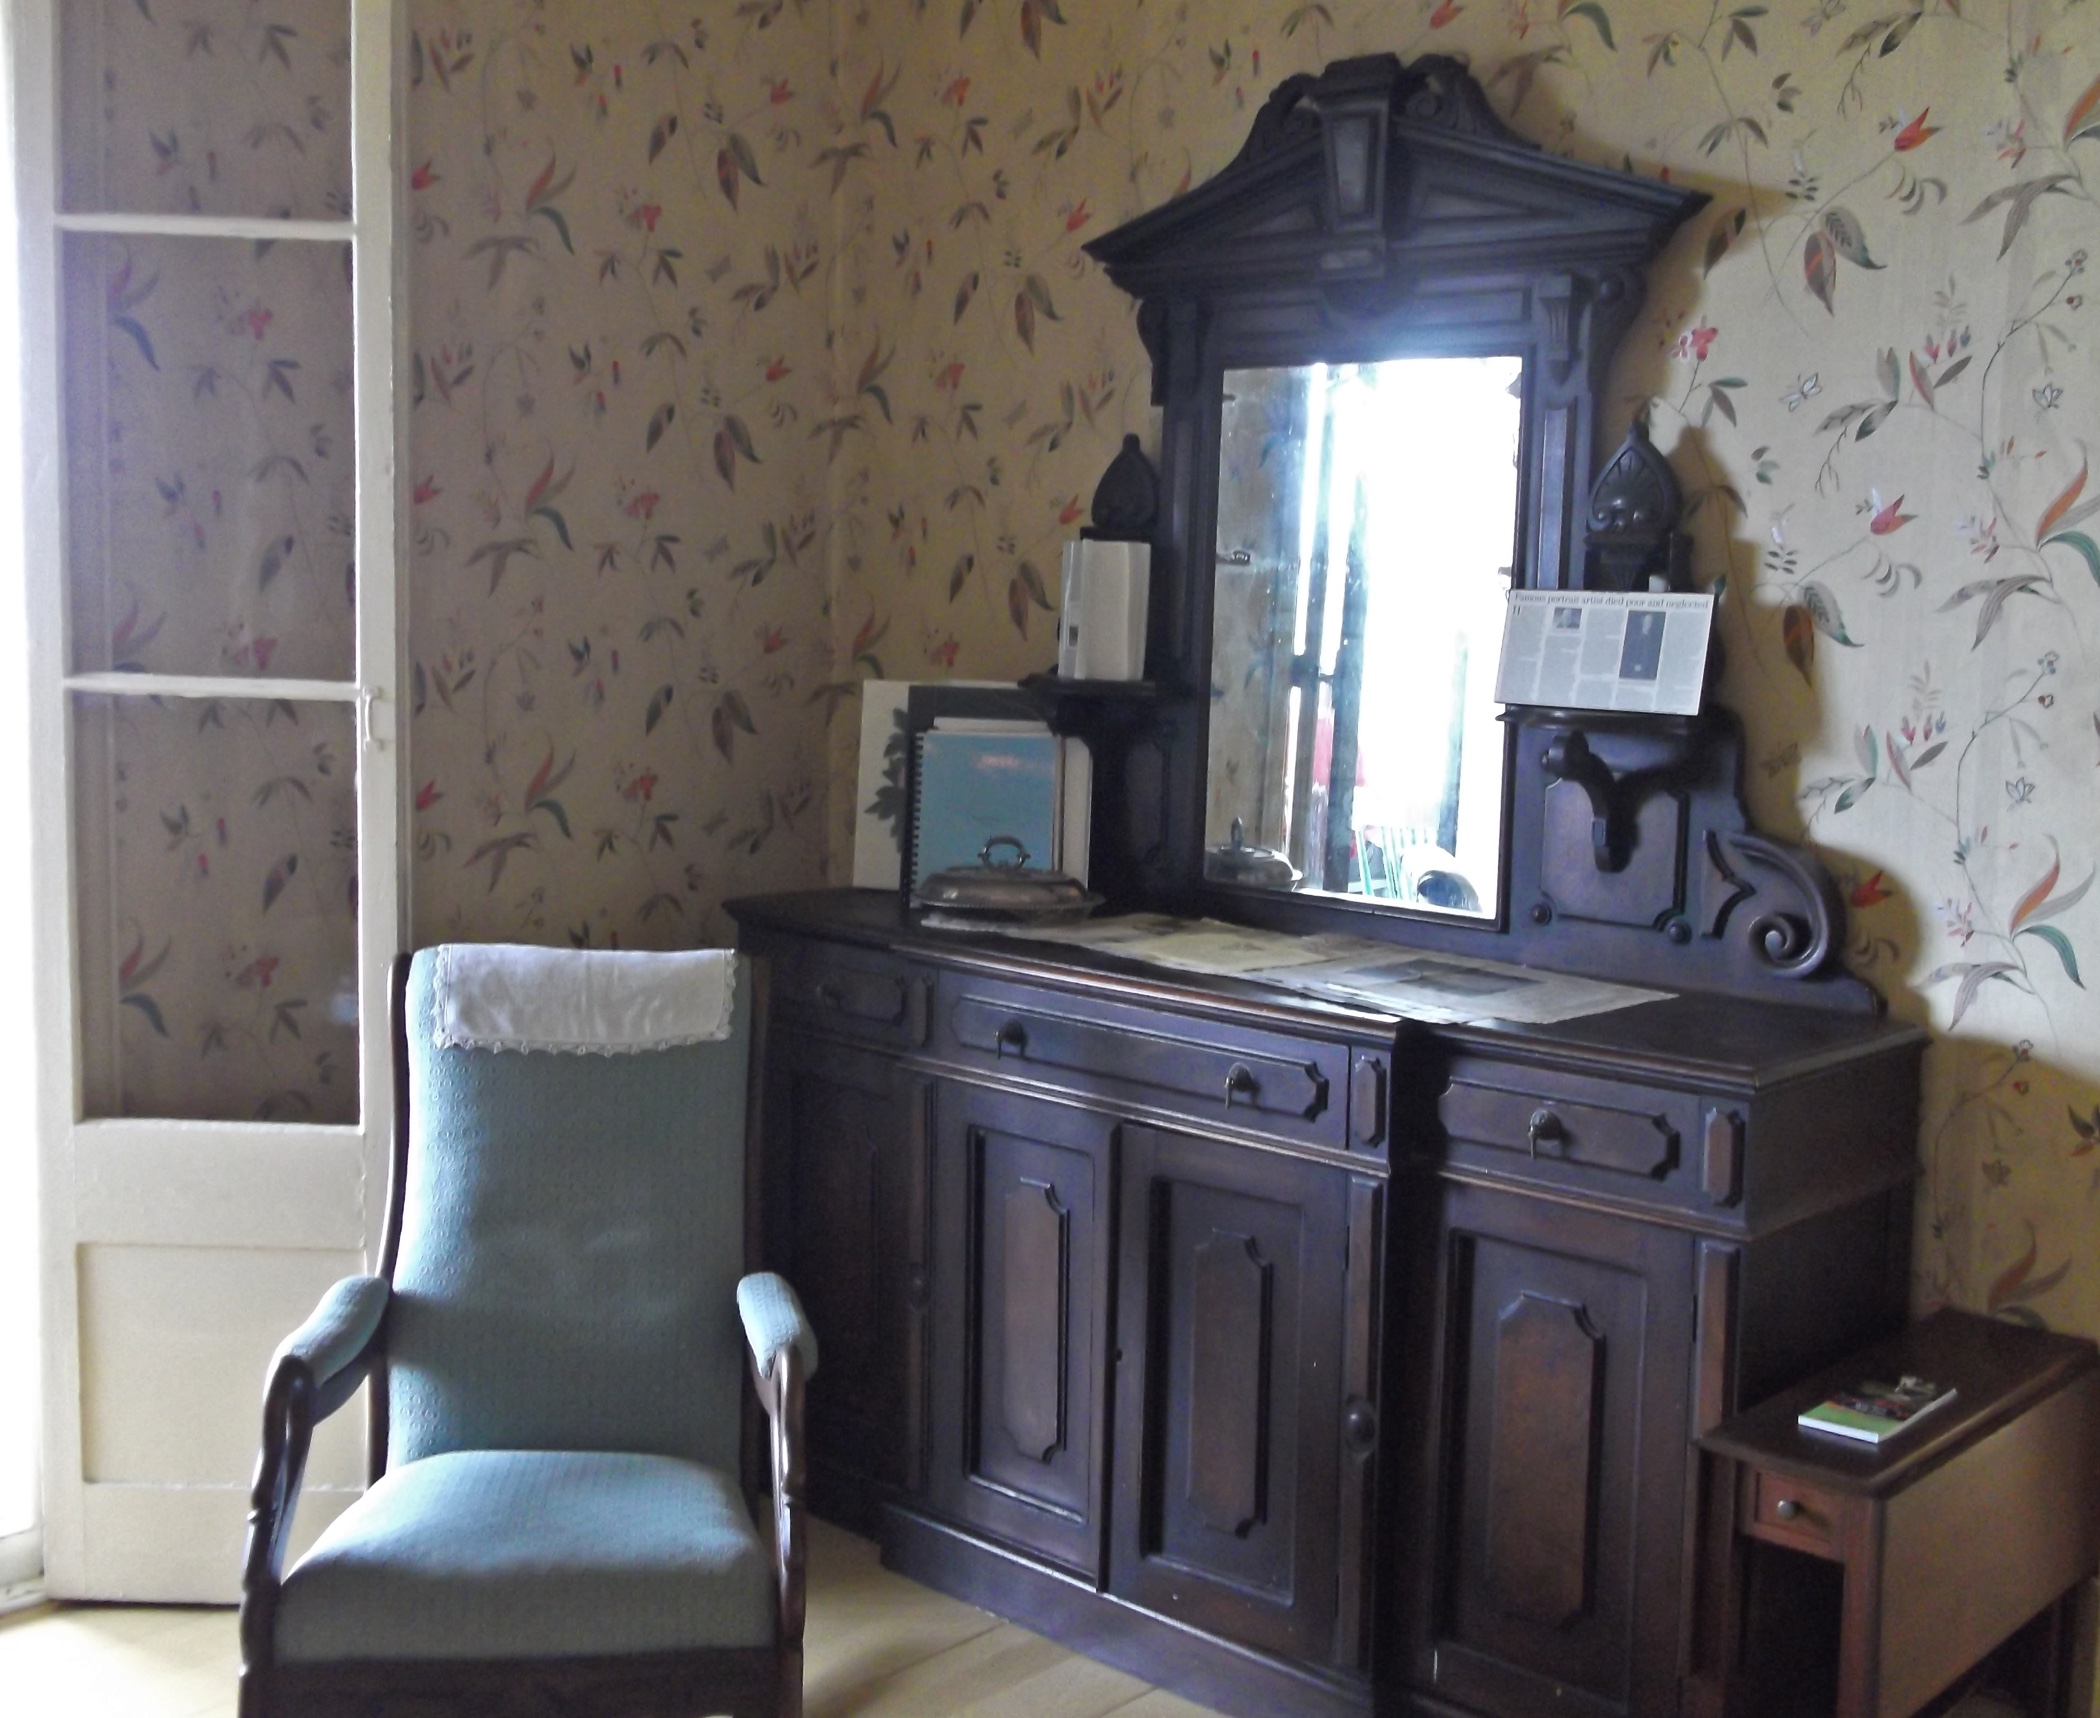 View of the interior corner of a dining room, with an upholstered chair and a wooden sideboard with drawers, cupboard doors and a mirror. The wall behind the furniture is wallpapered in a floral design.